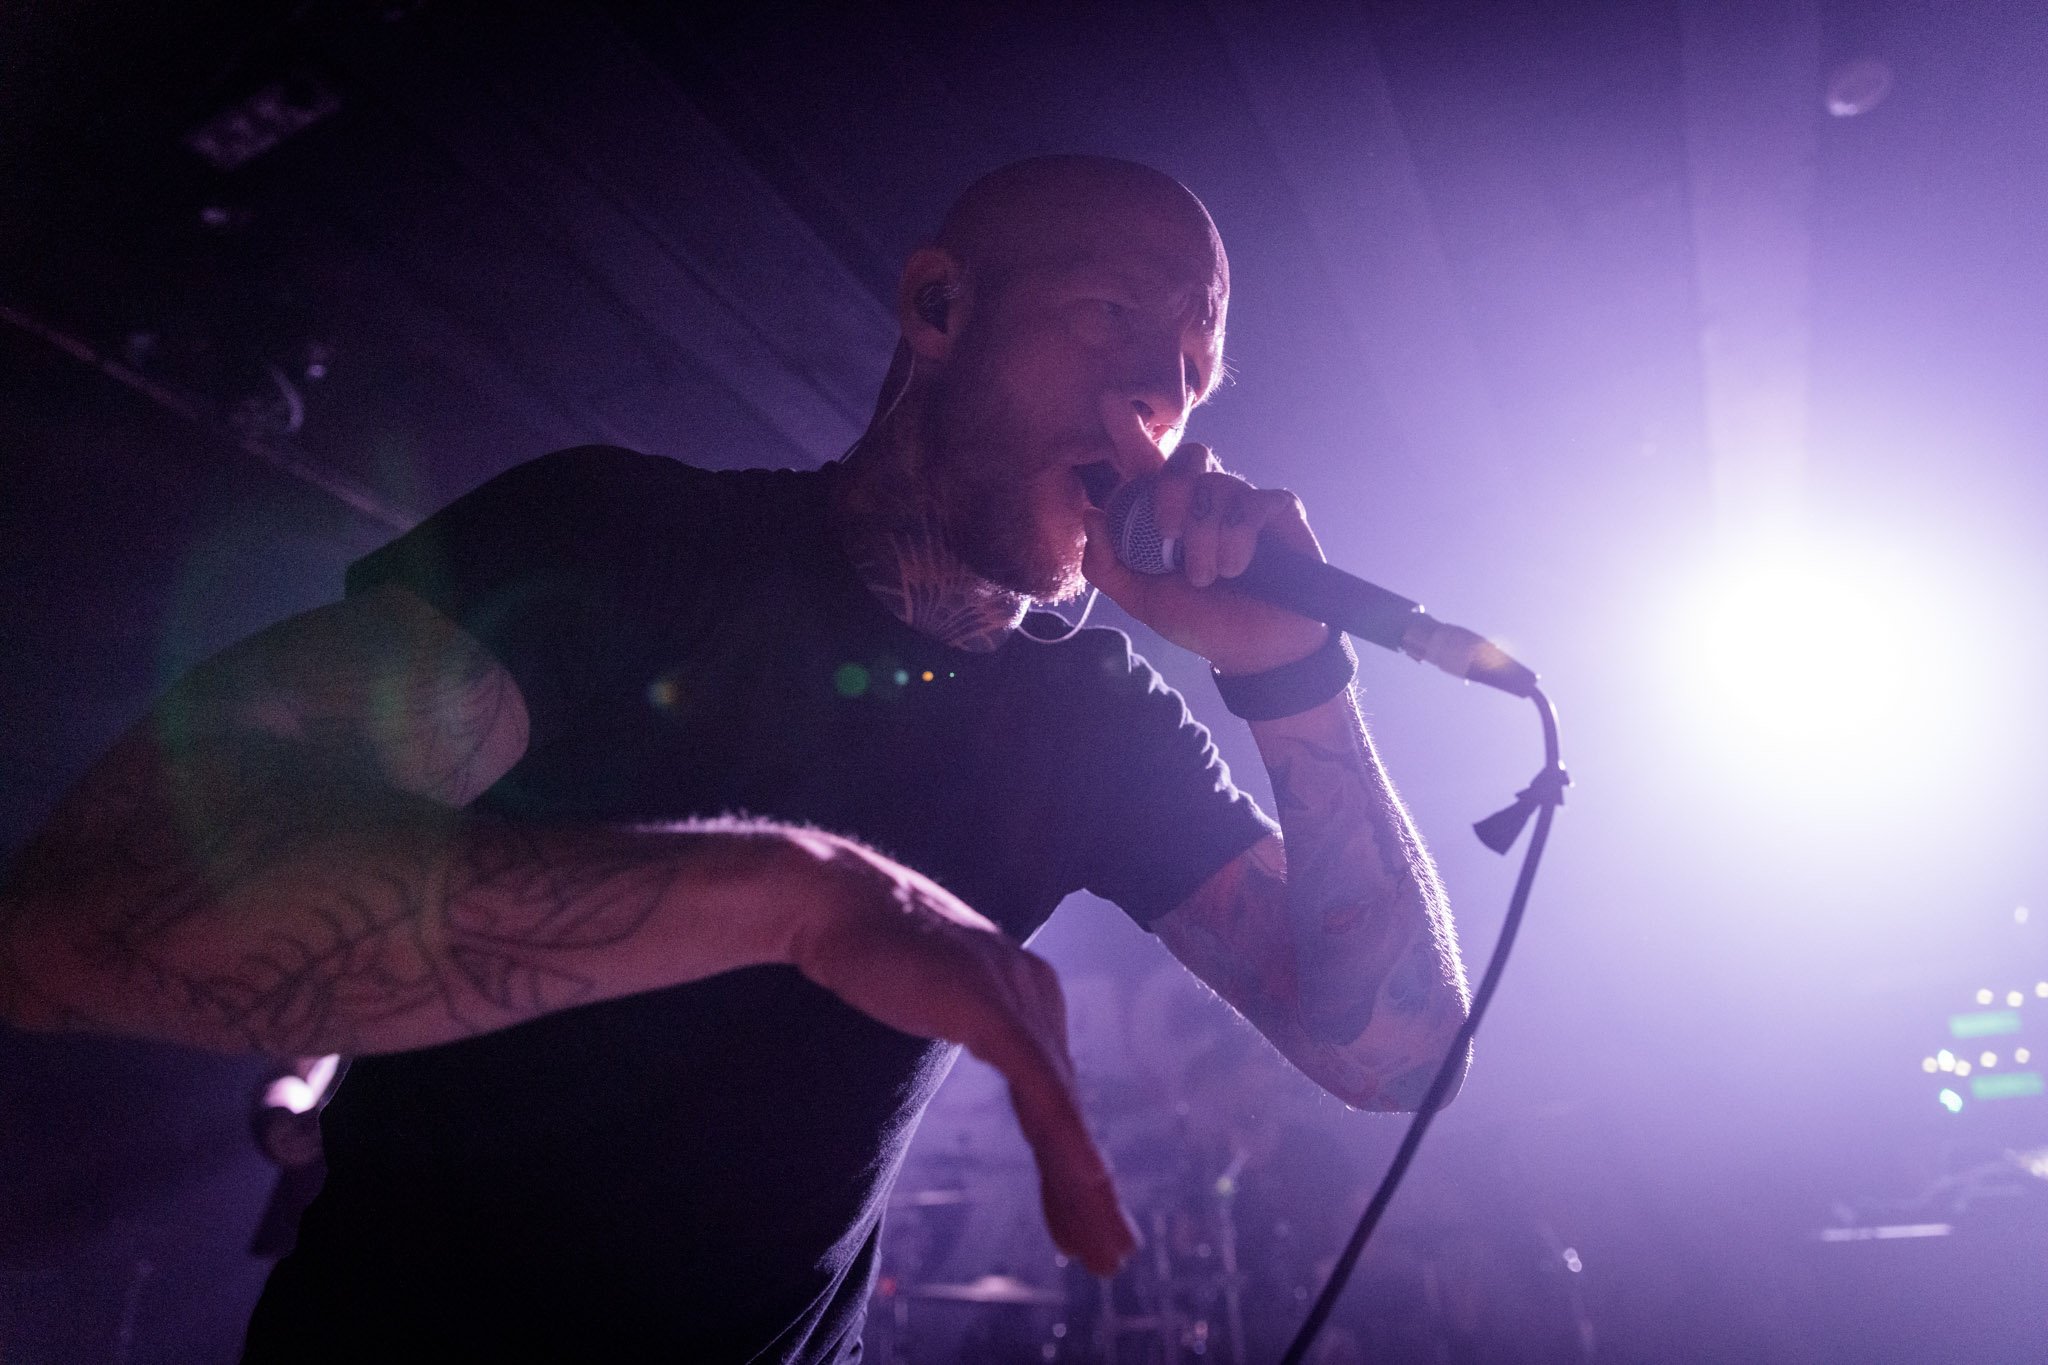 Allegaeon at the Rebellion in Manchester on November 29th 2022 